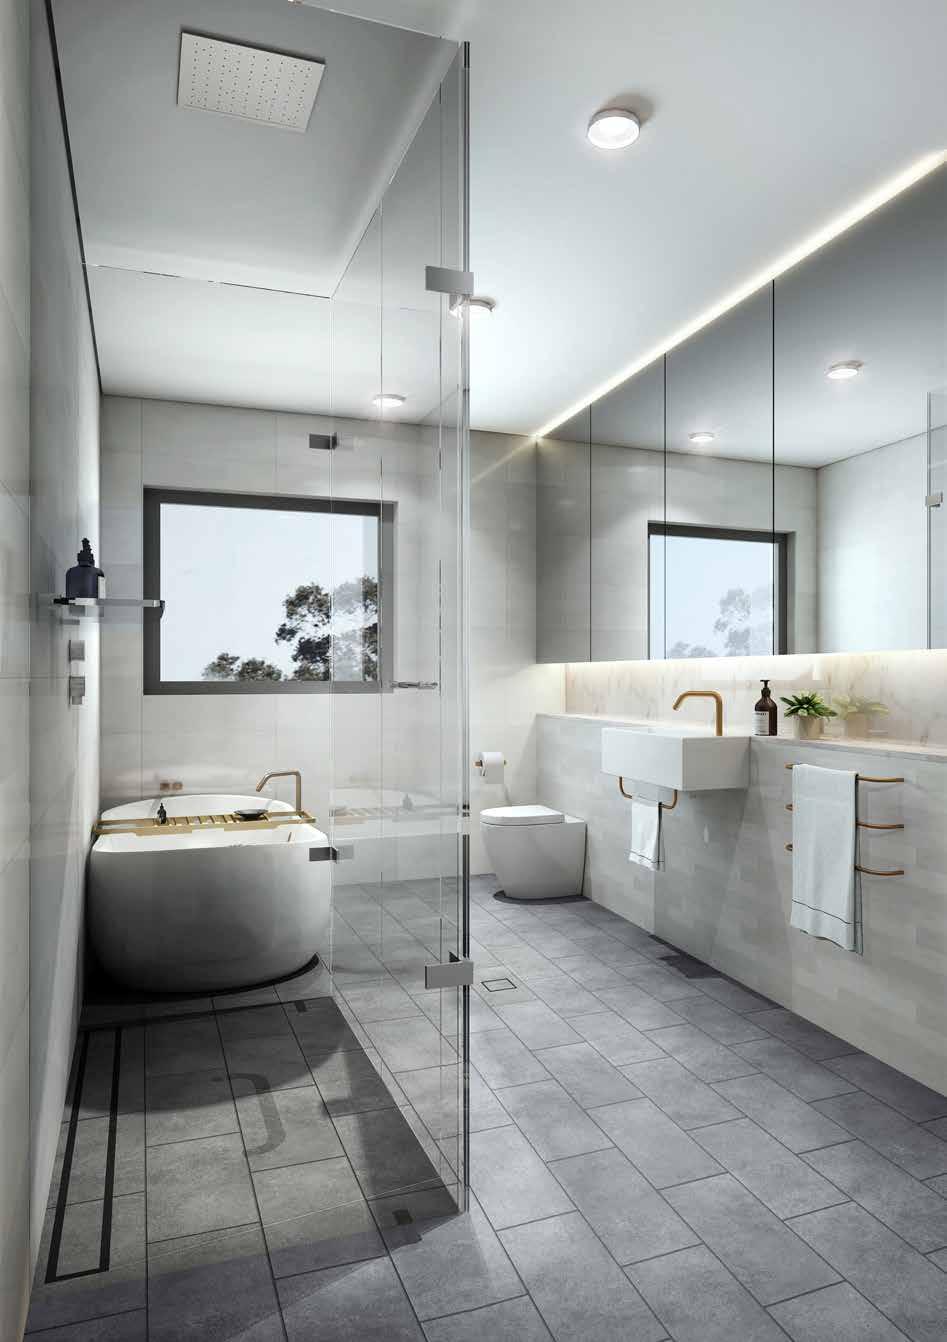 ARTIST S IMPRESSION BATHROOMS FEATURE FLOATING BASINS, MIRRORED